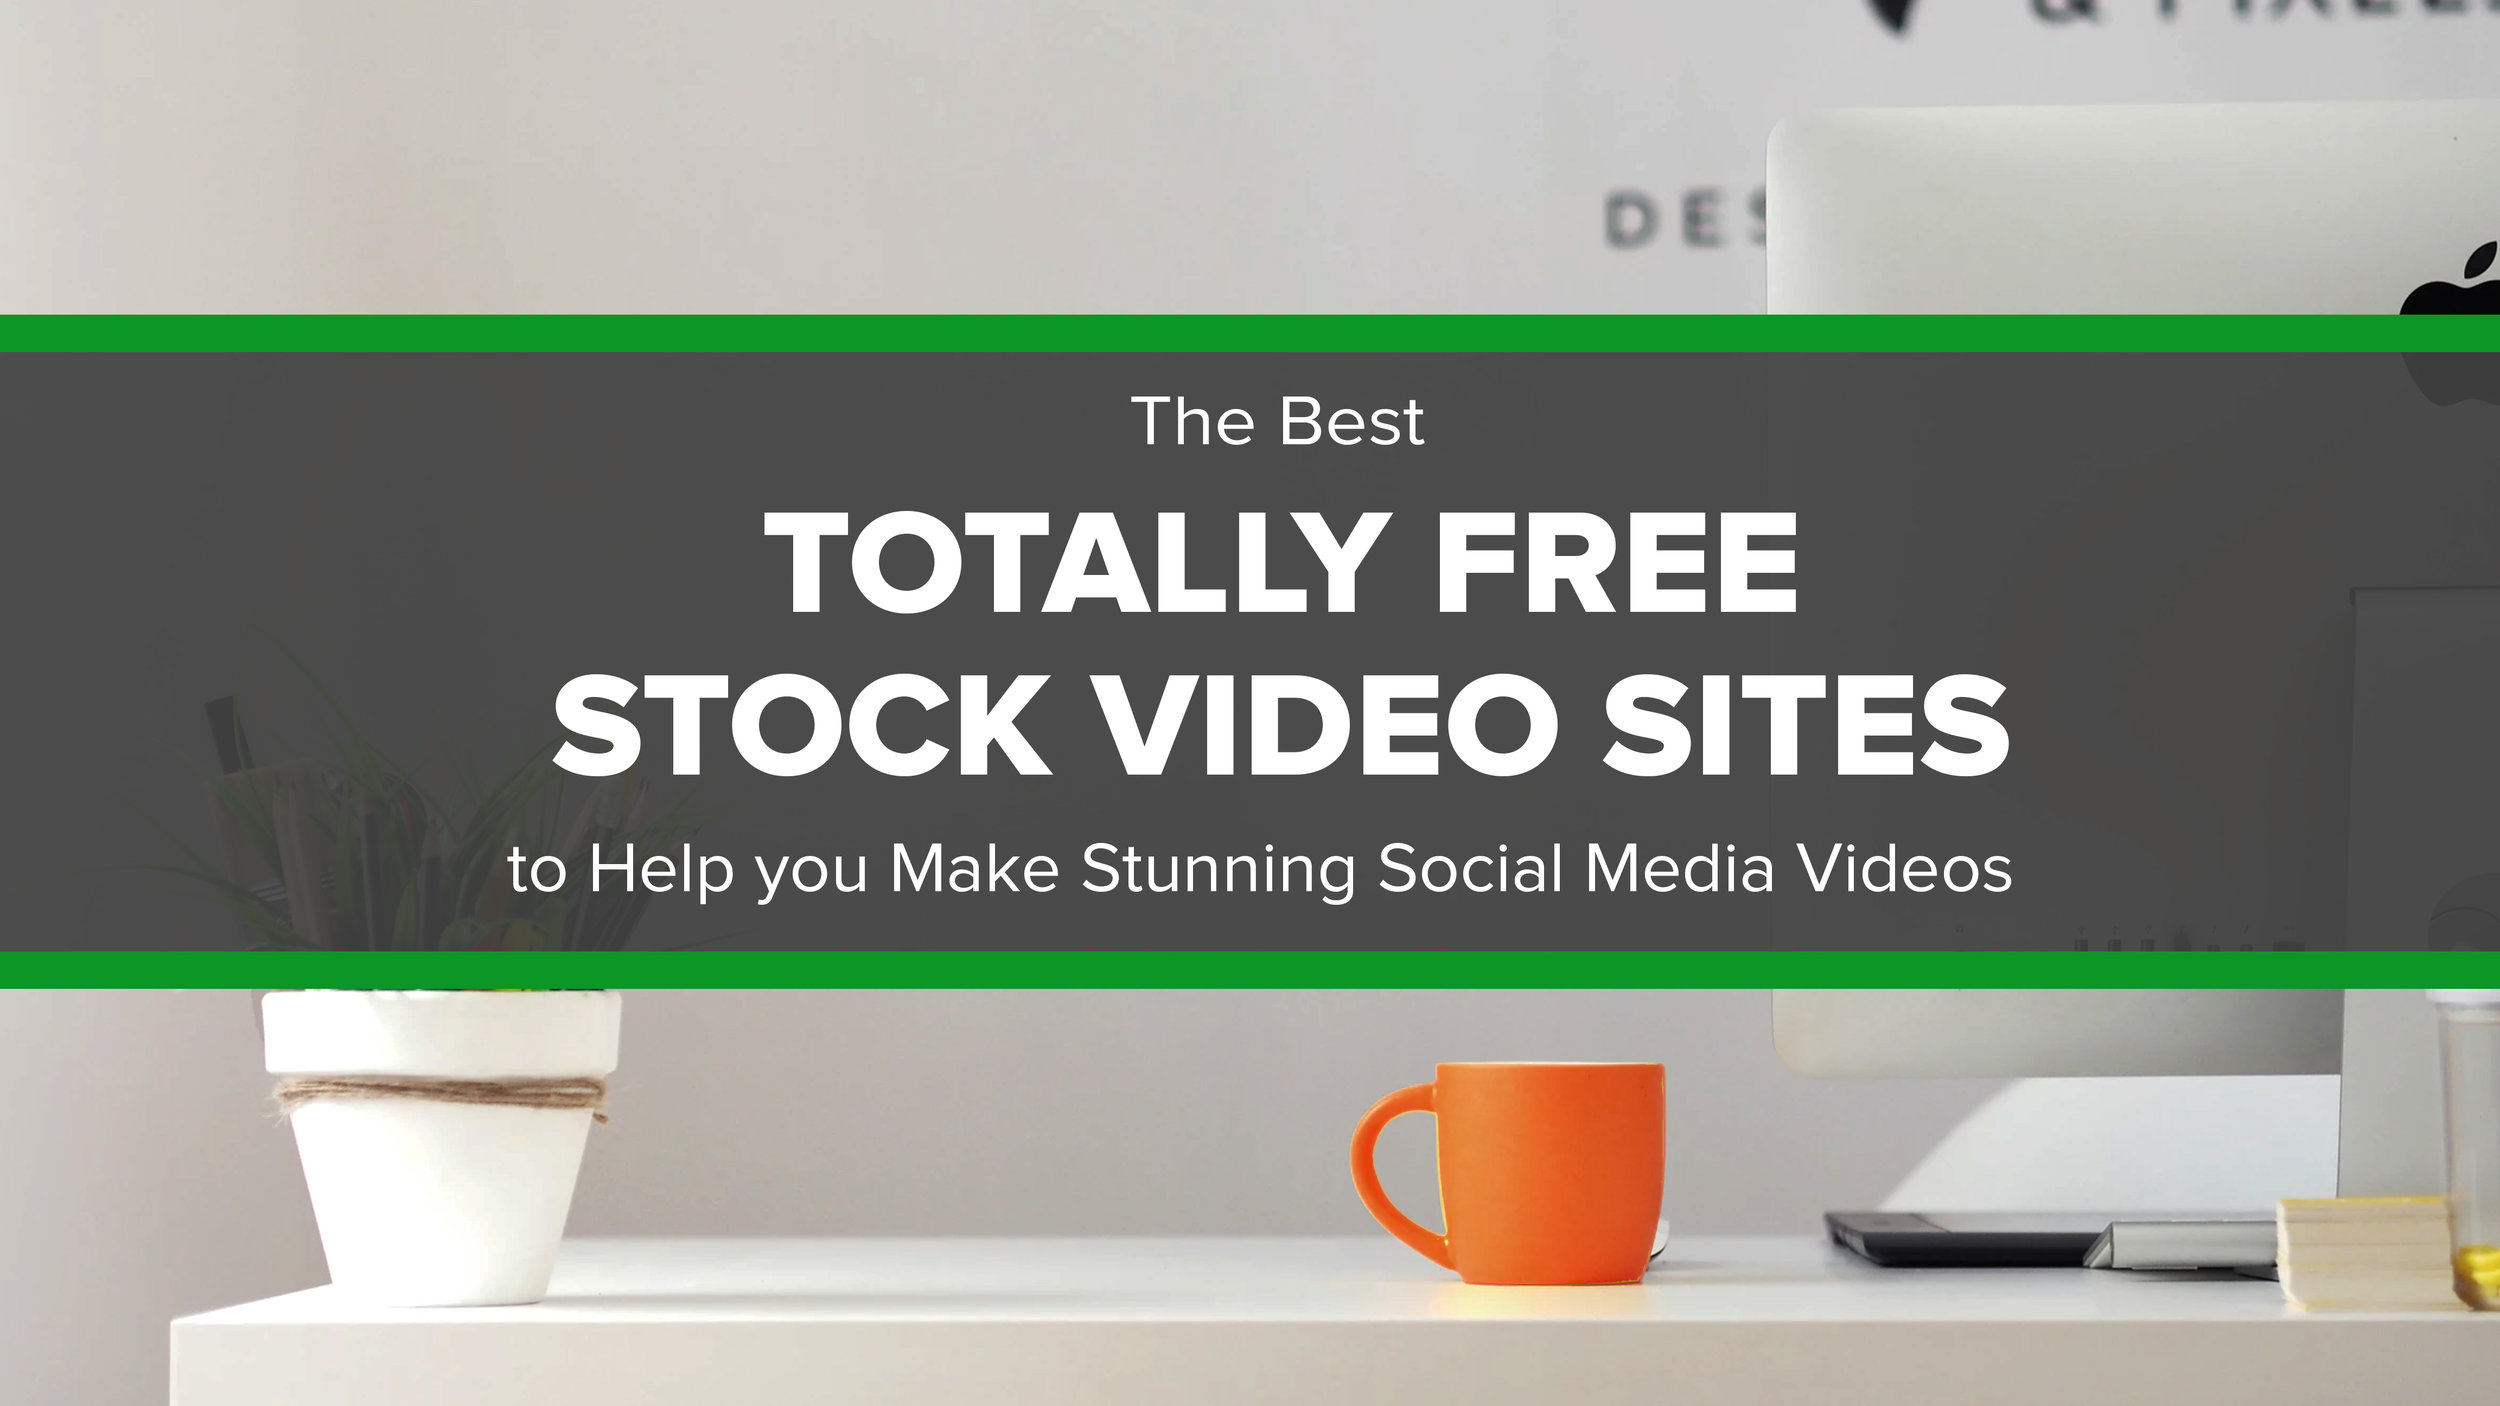 The Best Totally Free Stock Video Sites To Help You Make Stunning Media Videos — Andrew Macarthy - Social Media Marketing